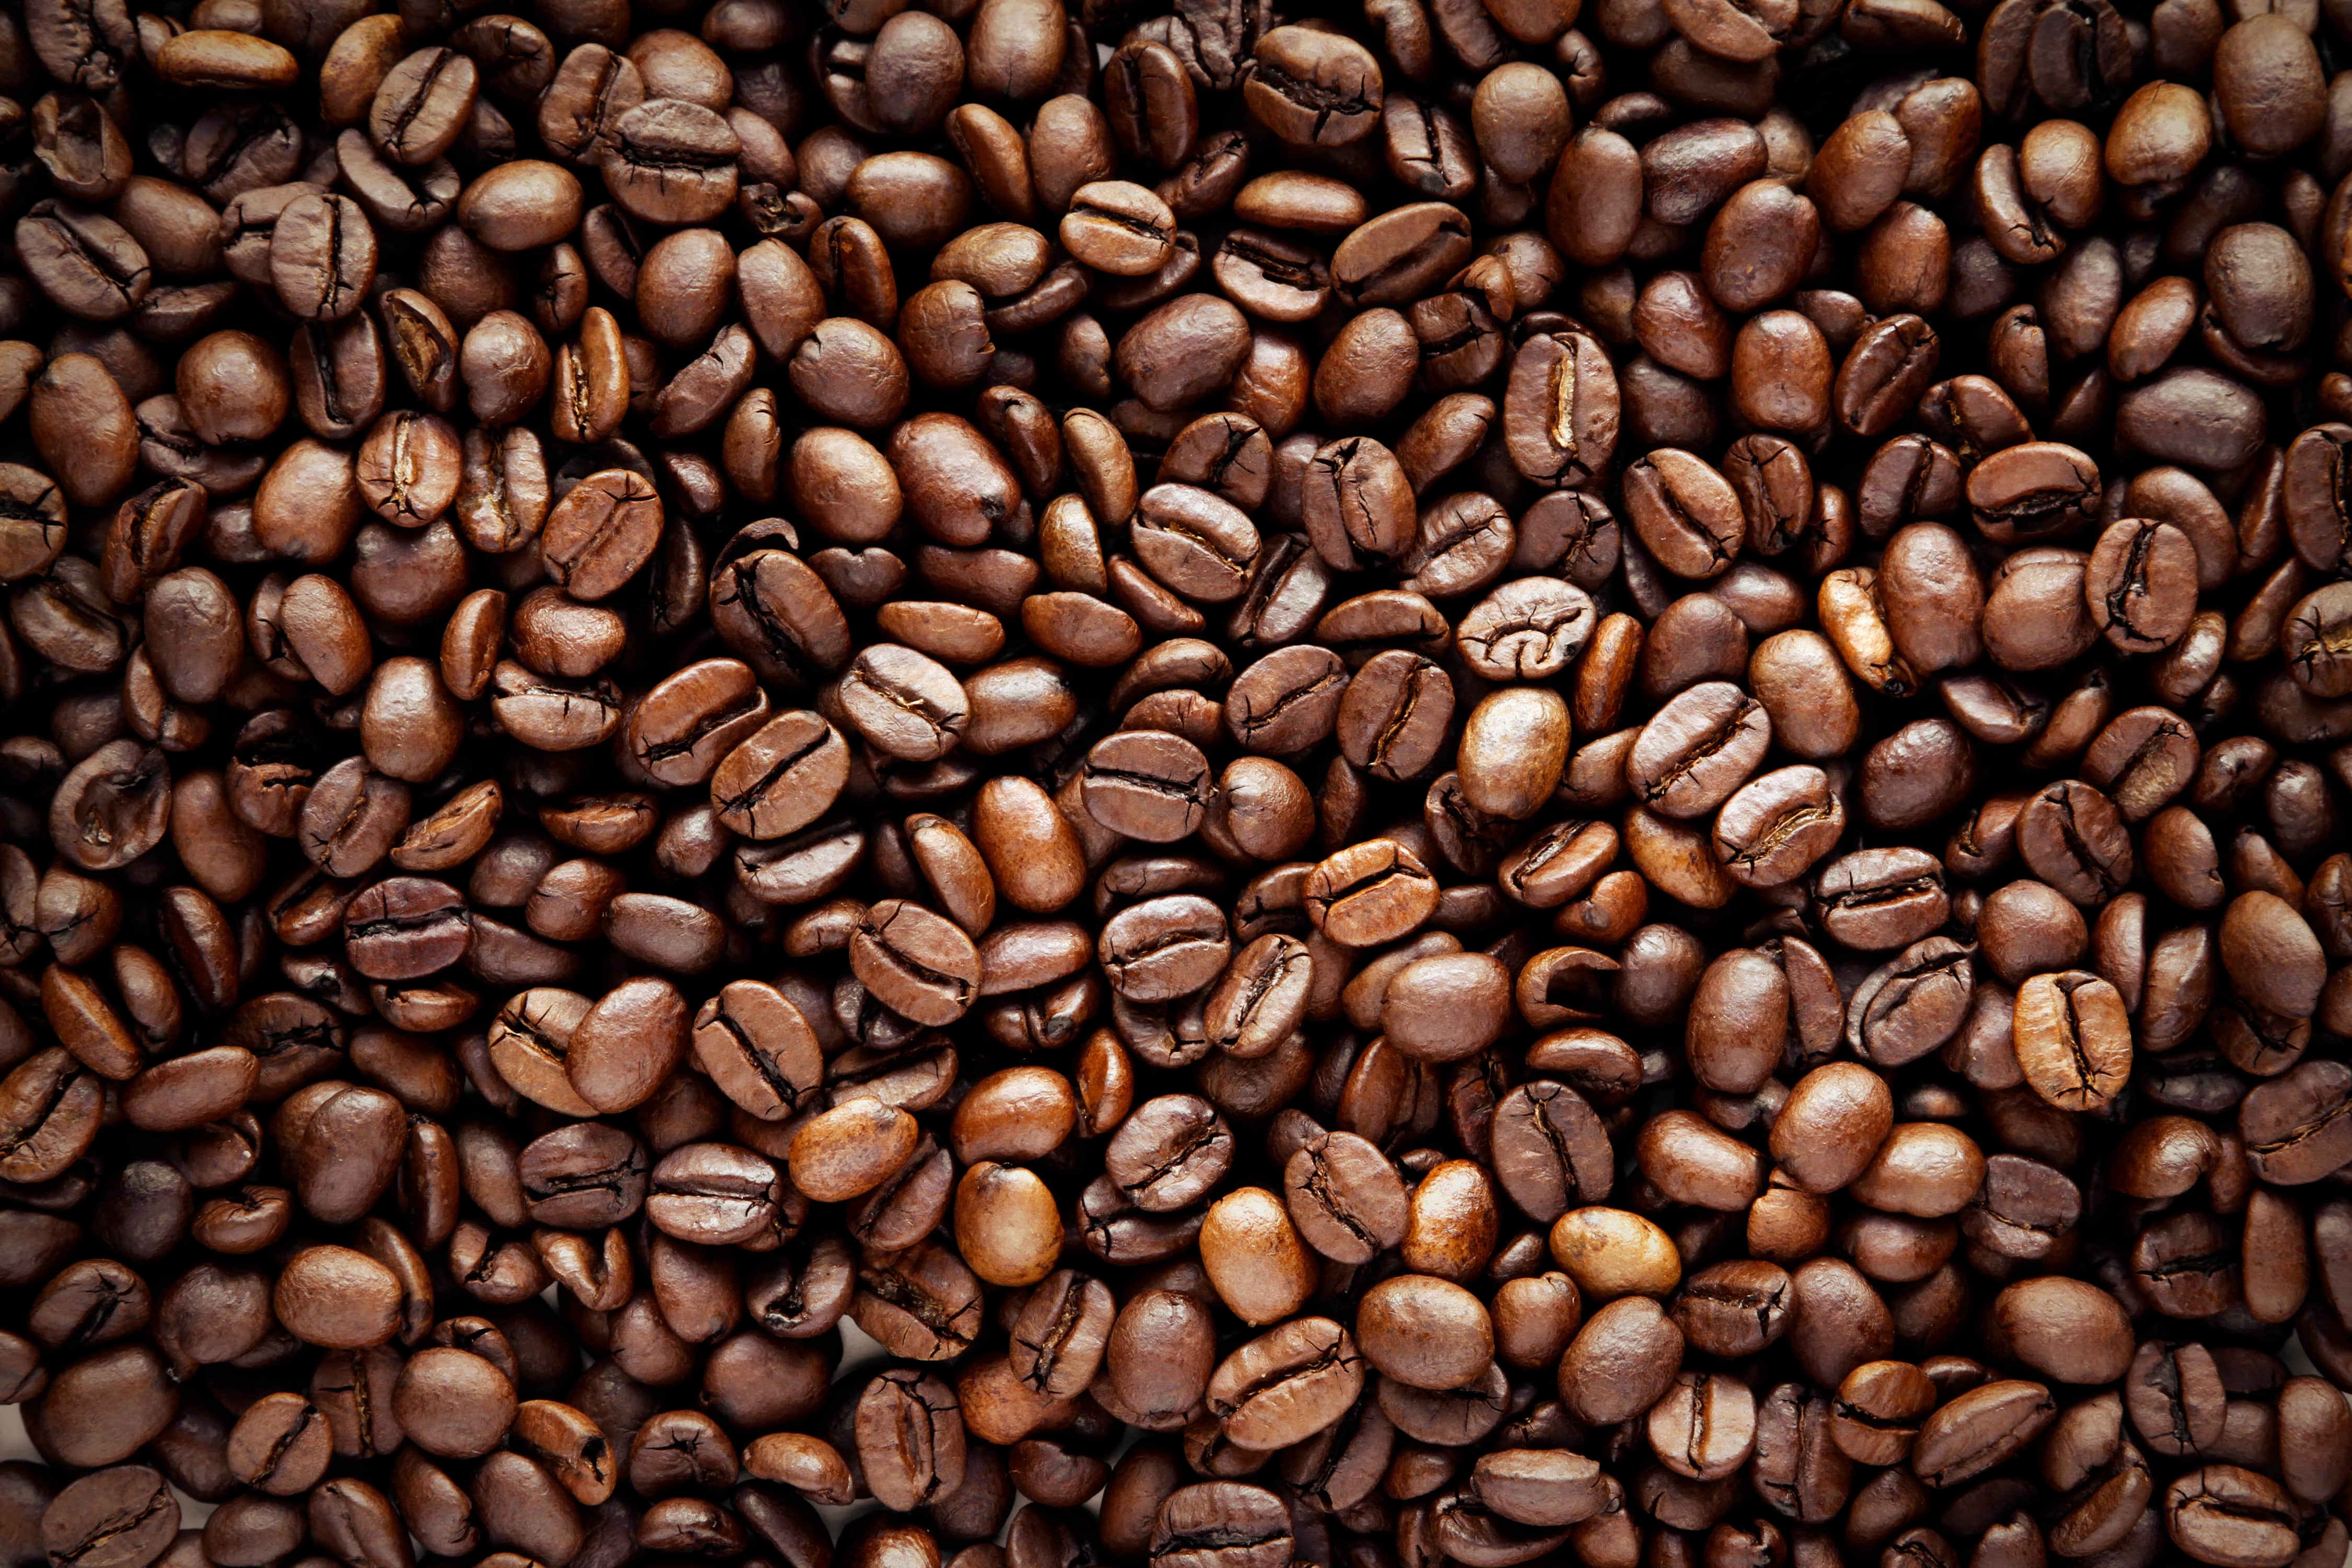 Close up on huge number of roasted coffee beans takes up the entire frame.